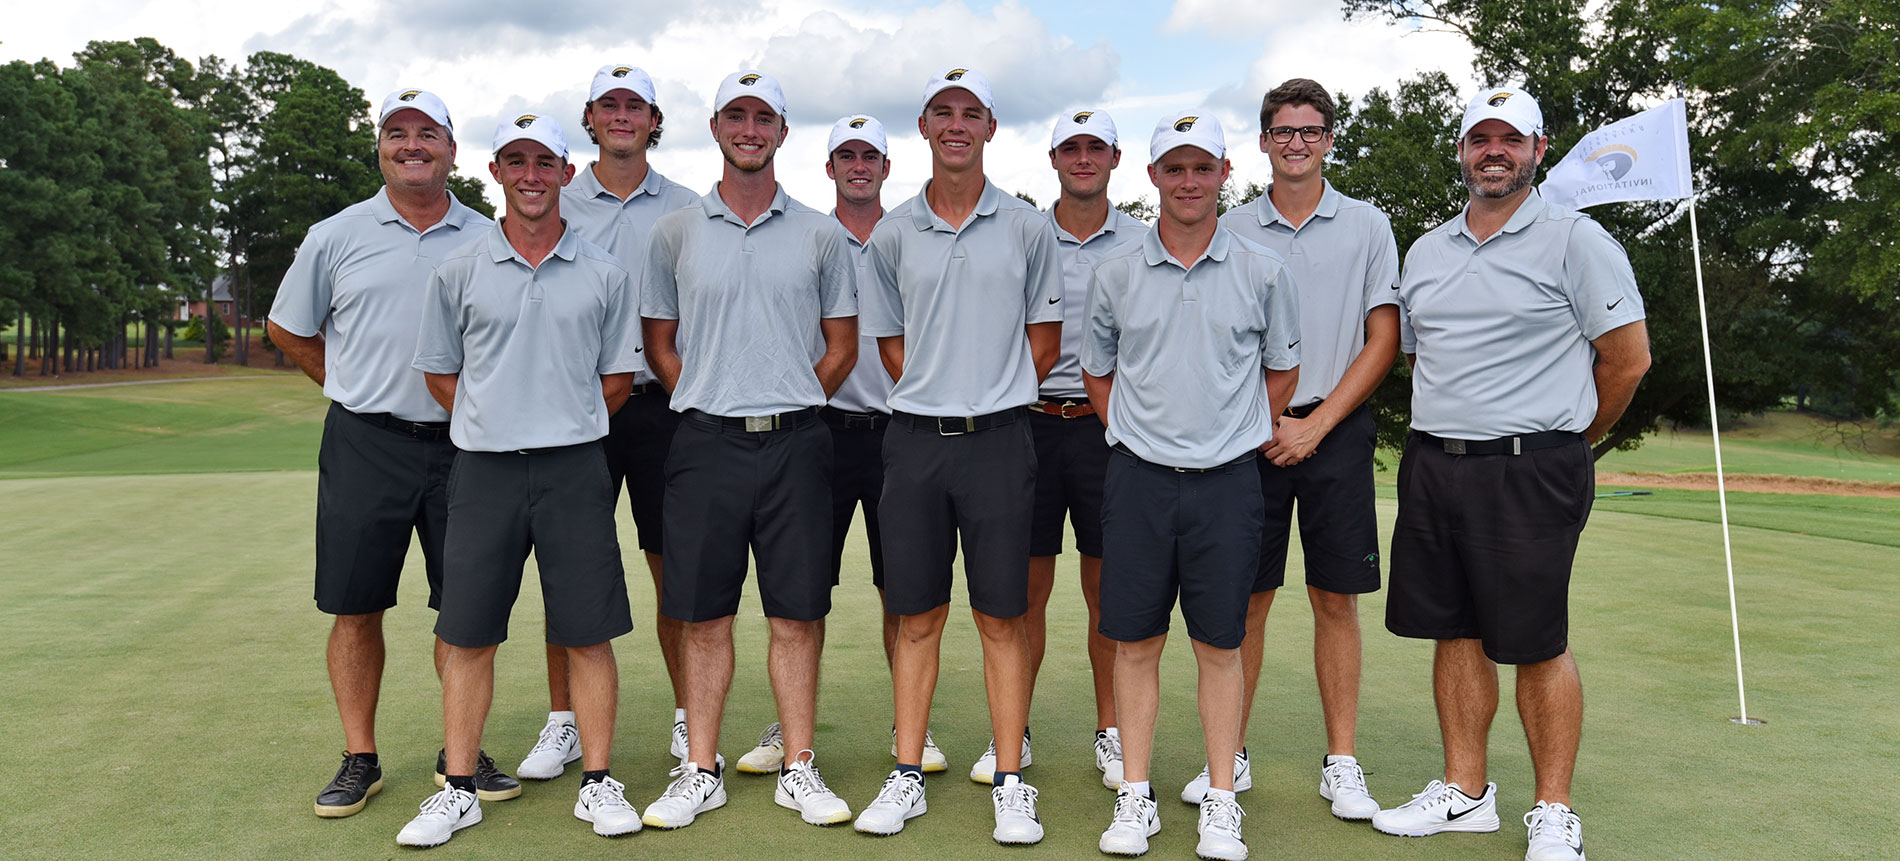 Men’s Golf Goes Coast-to-Coast for 46th Annual Hanny Stanislaus Invitational